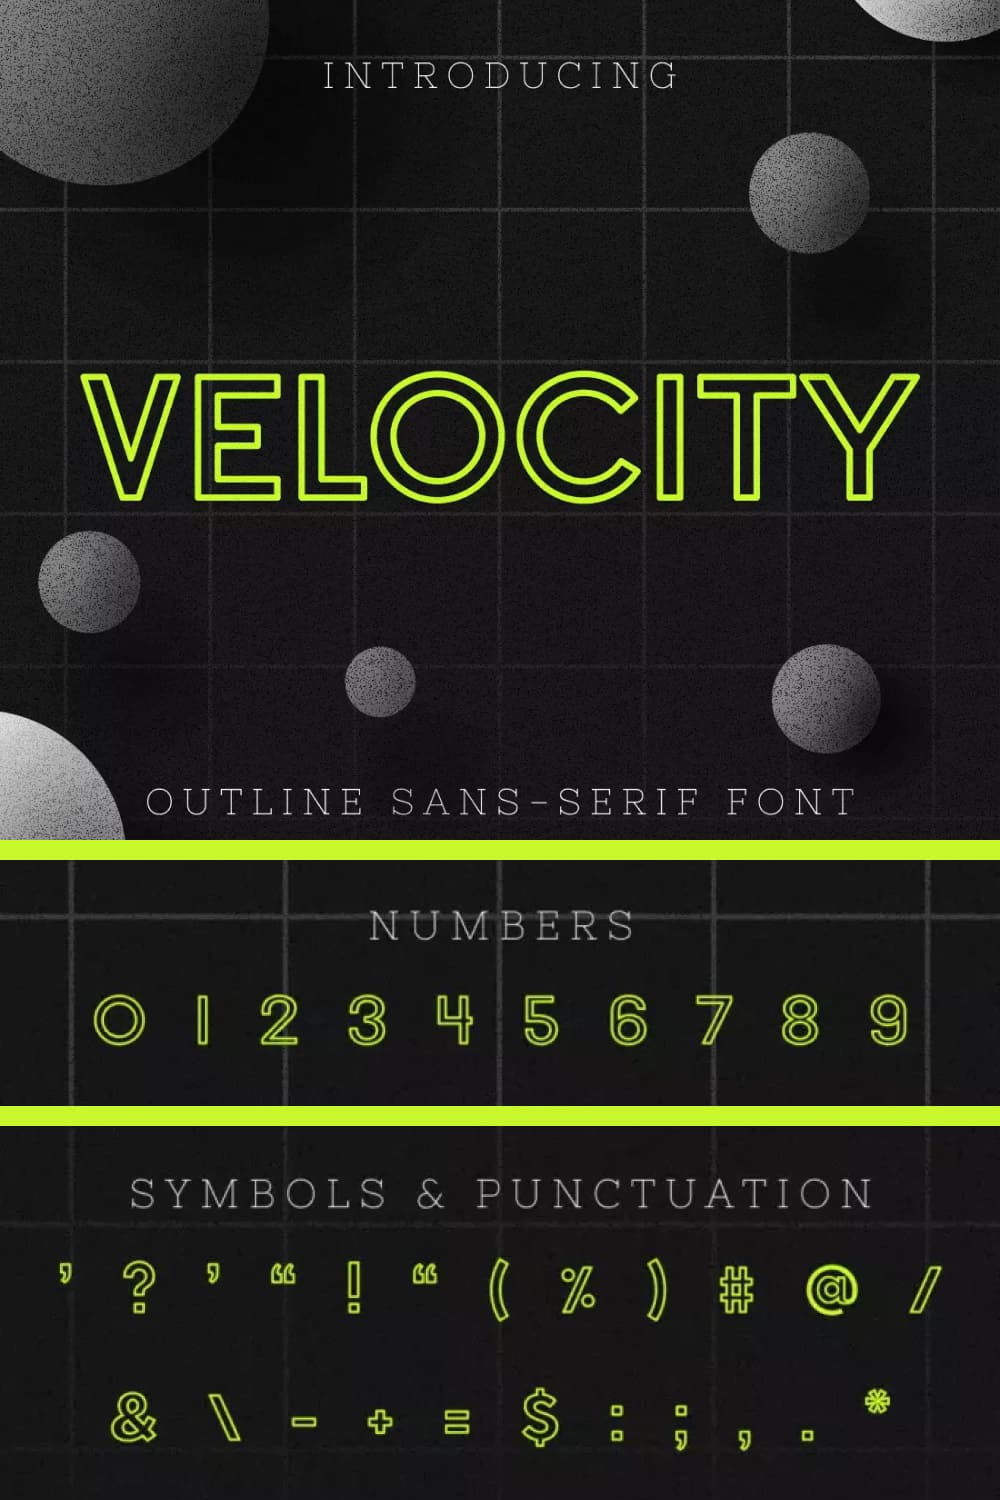 An example of a Velocity Outline Sans-Serif Font in green on a black background.